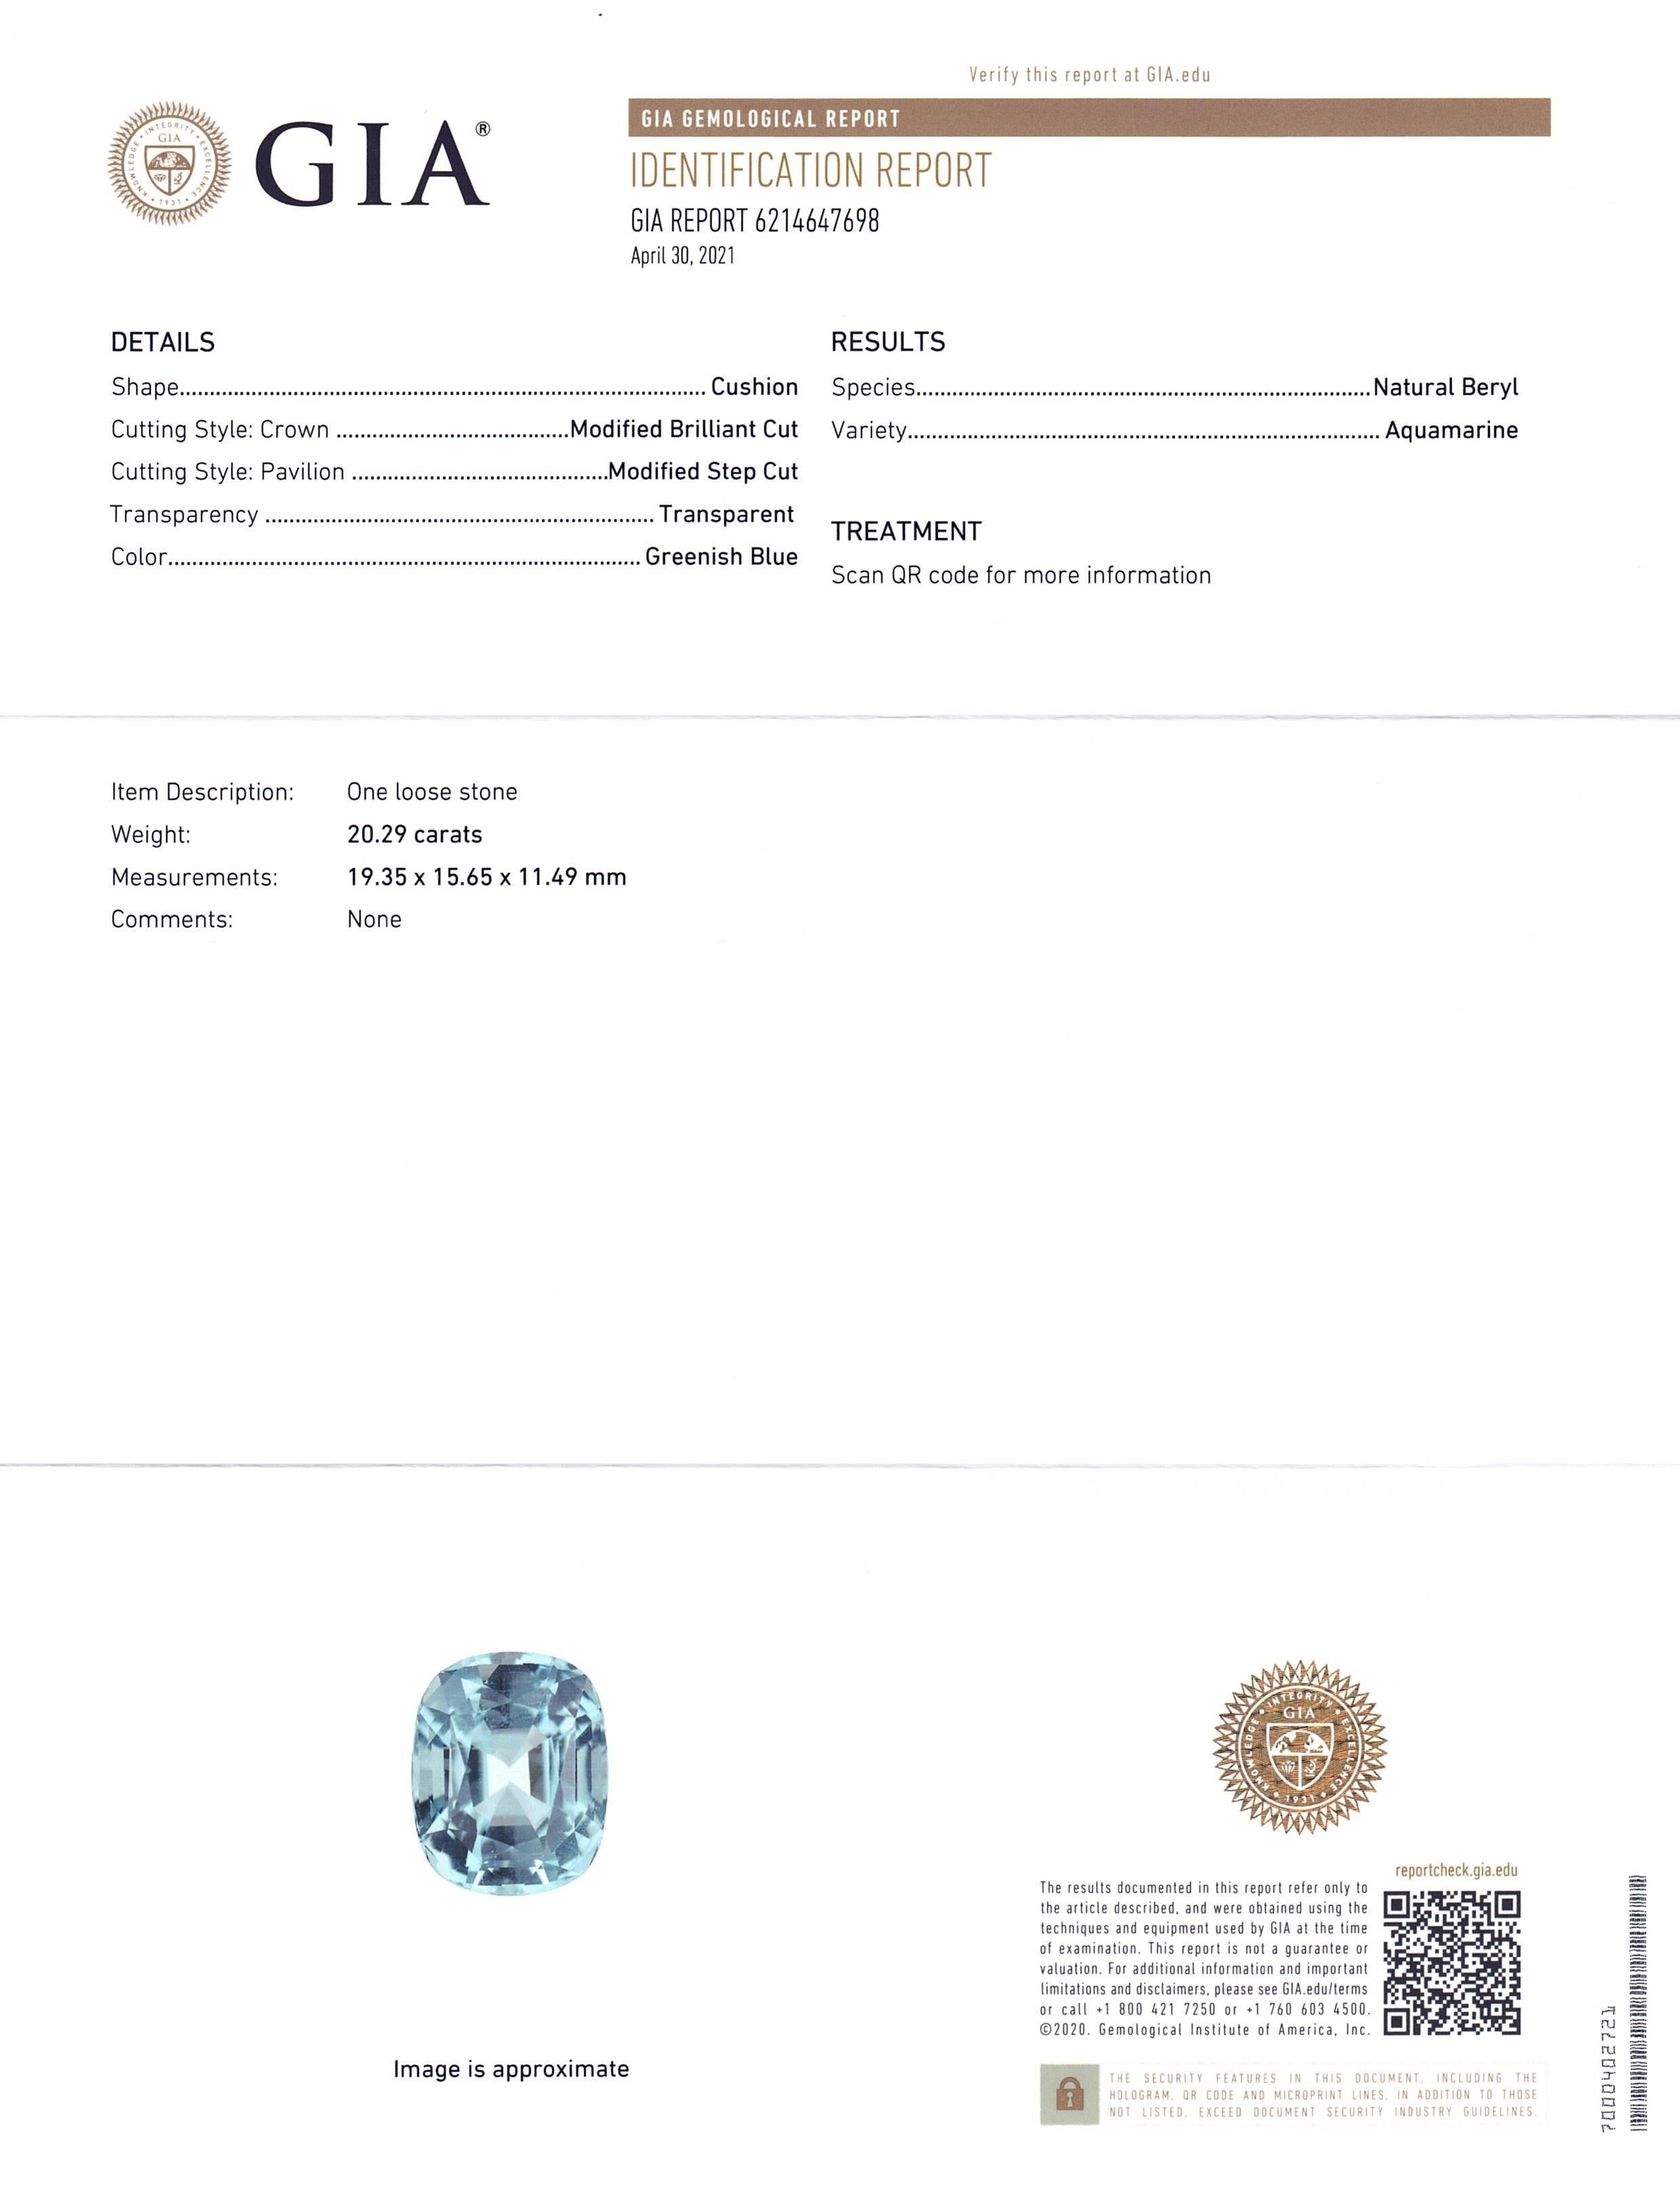 This is a stunning GIA Certified Aquamarine 

The GIA report reads as follows:

GIA Report Number: 6214647698
Shape: Cushion
Cutting Style: 
Cutting Style: Crown: Modified Brilliant Cut
Cutting Style: Pavilion: Modified Step Cut
Transparency: